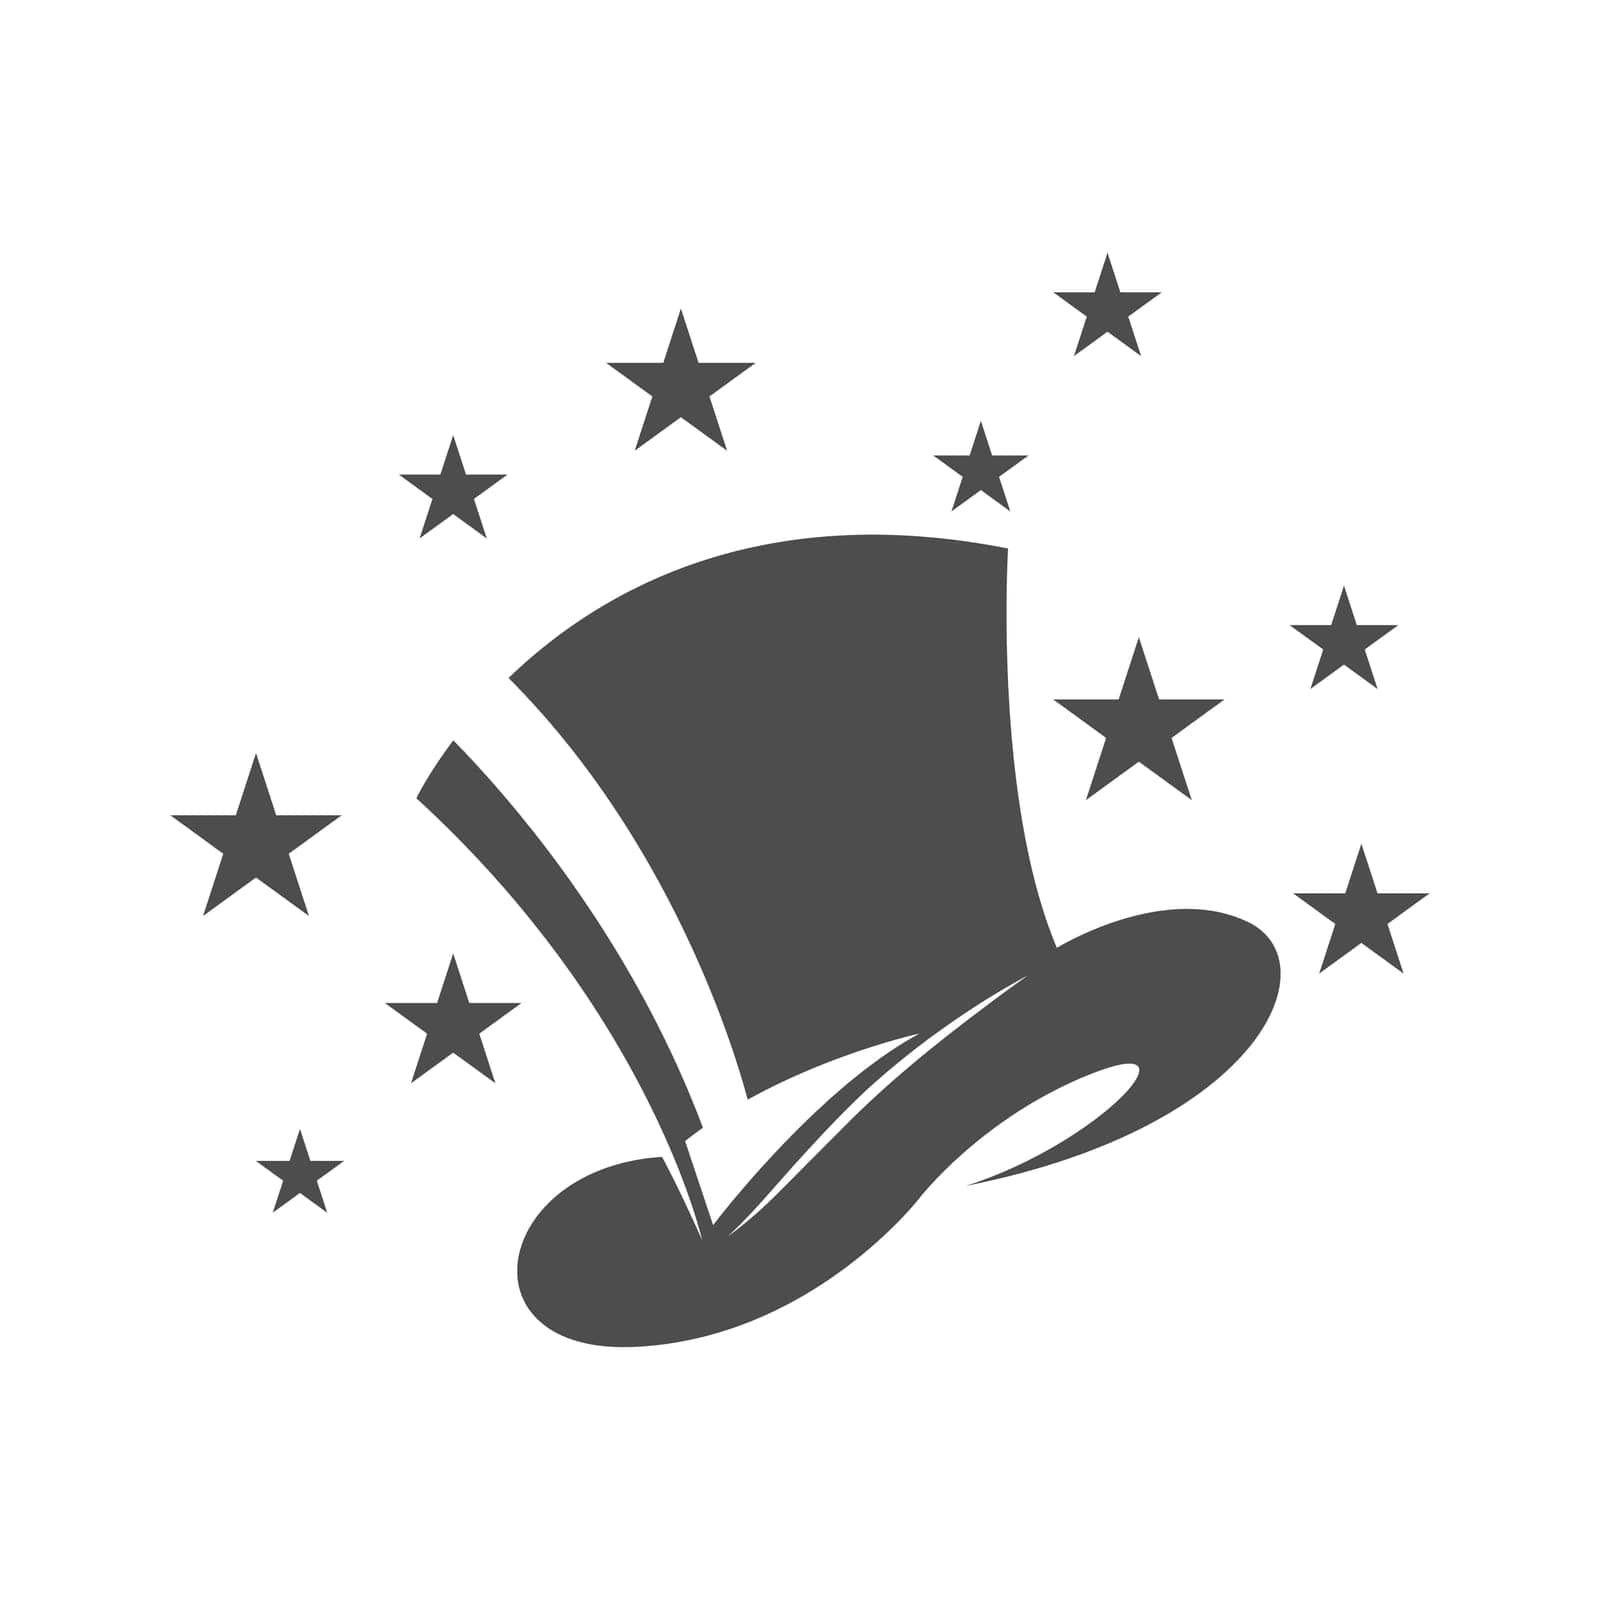 Magician and magician hat icon logo design by siti